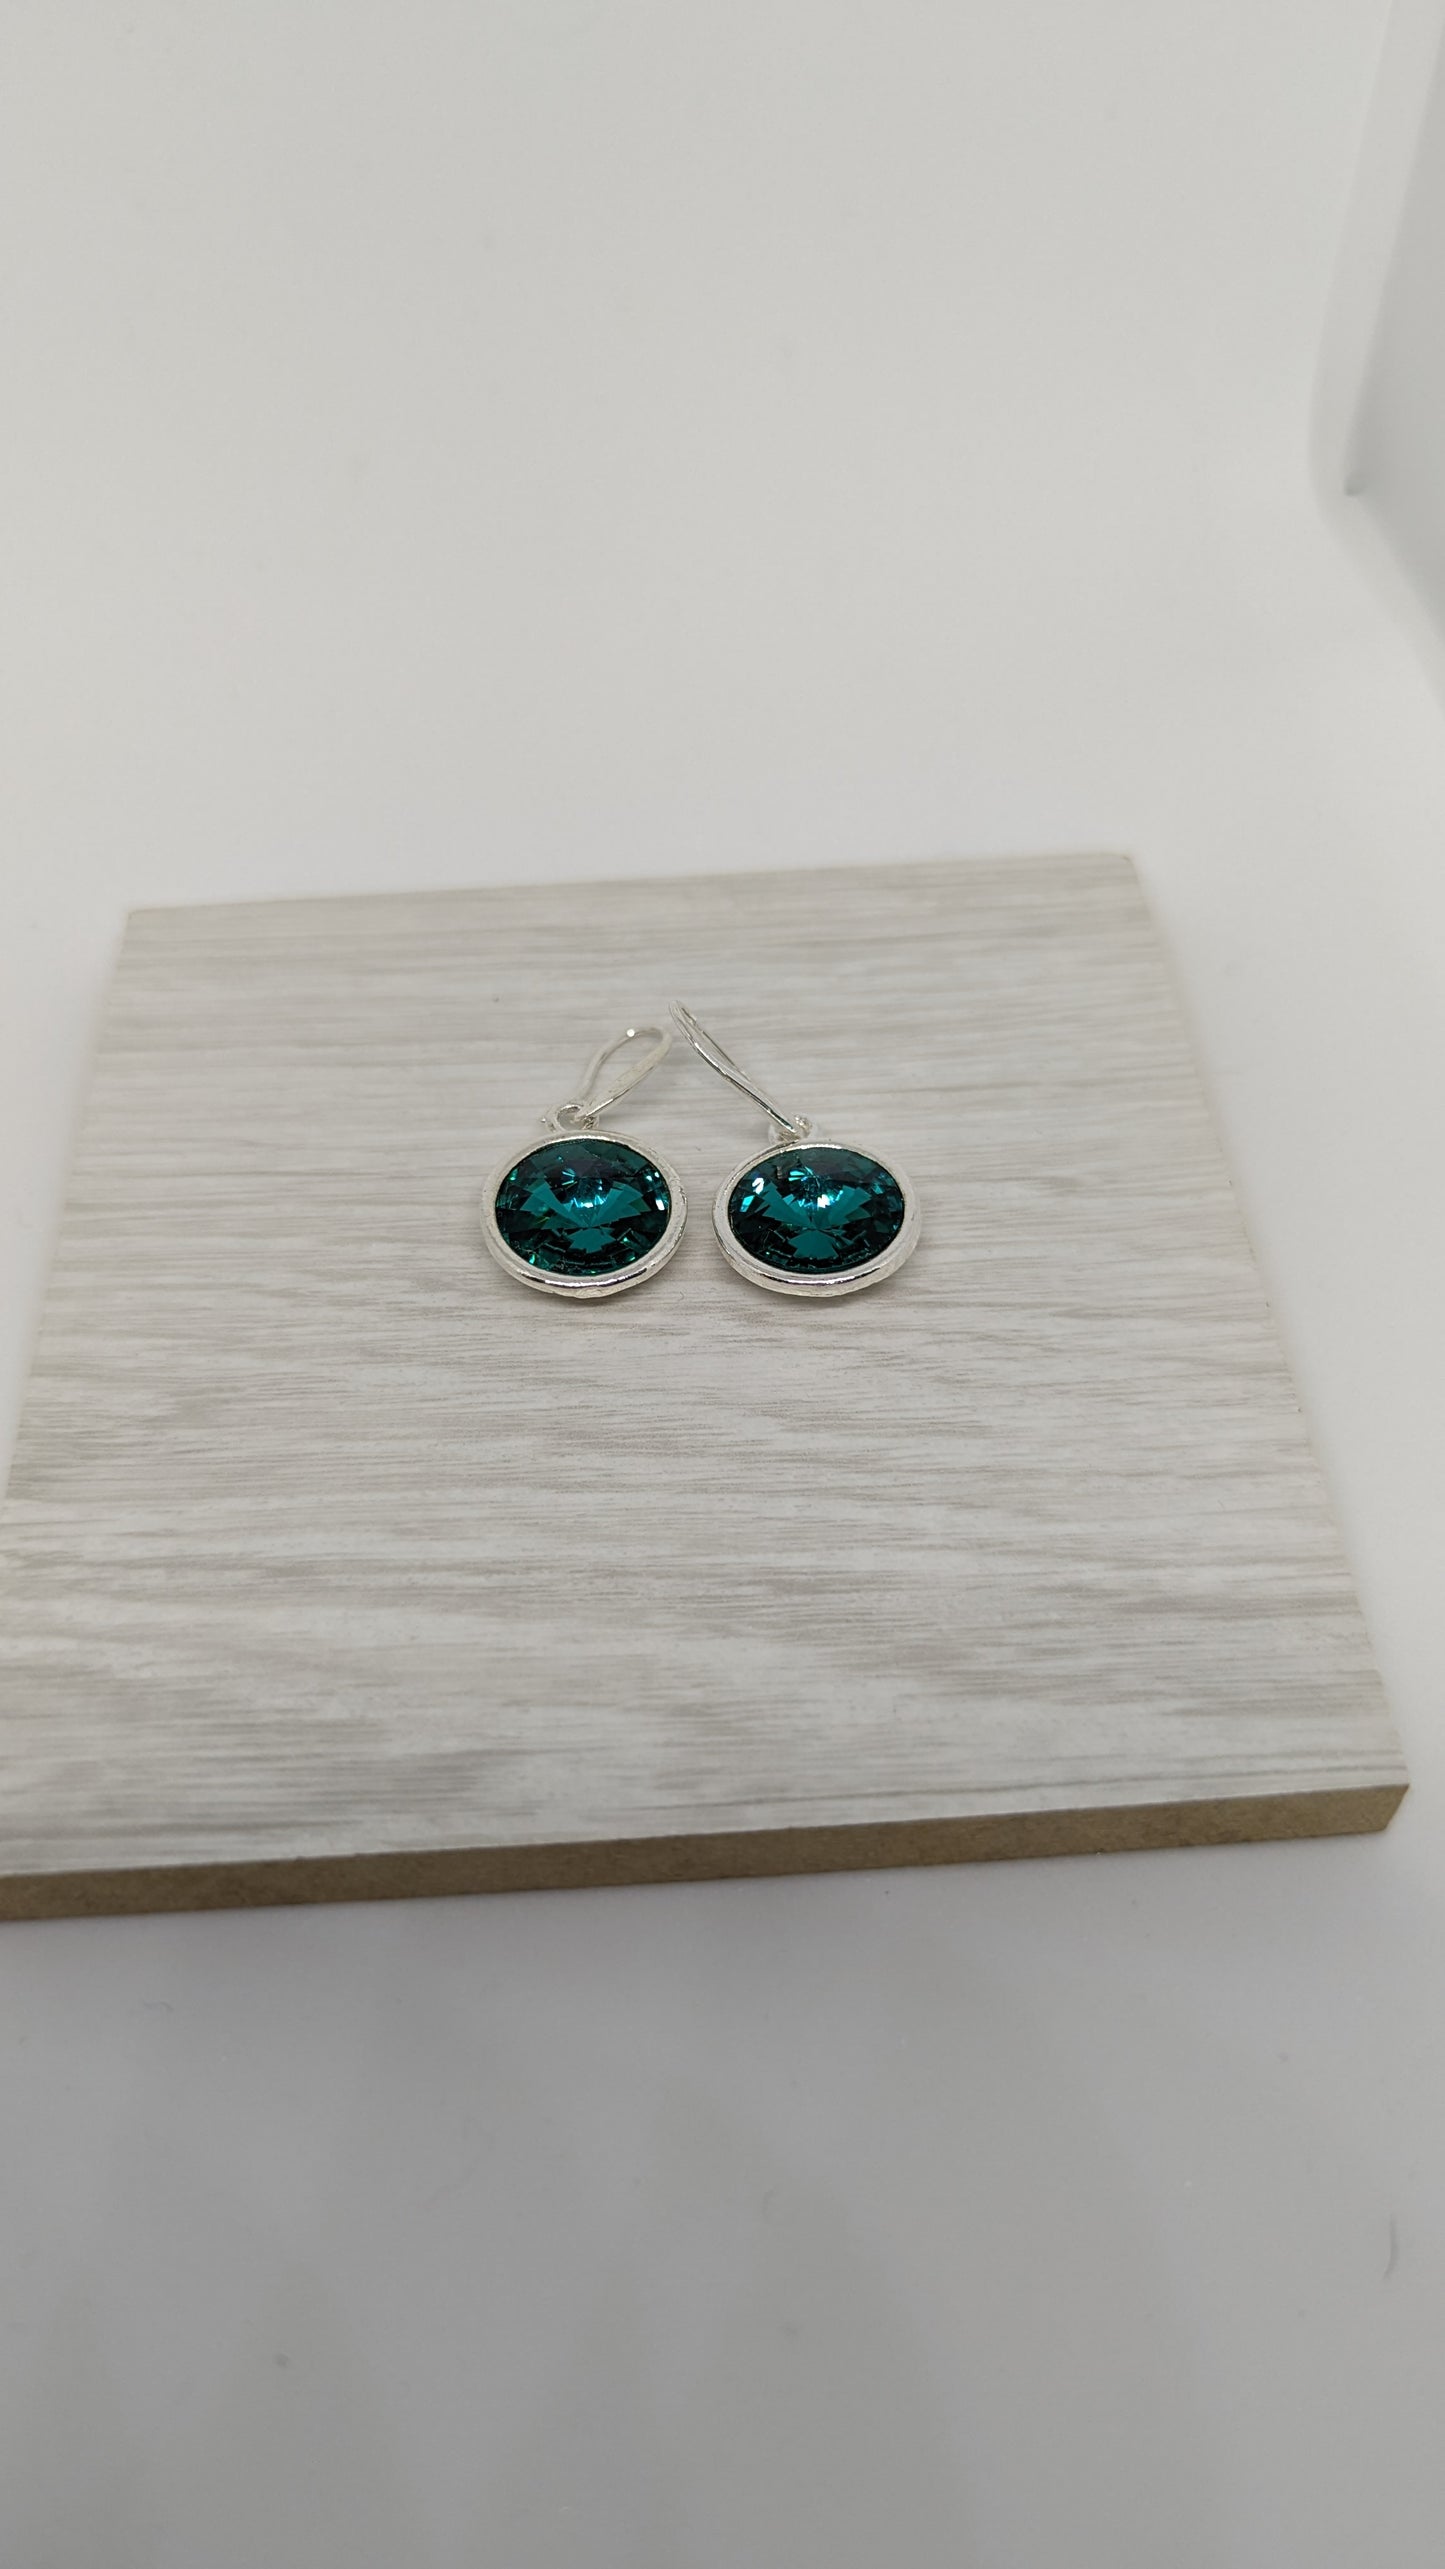 sparkly earrings, teal rivoli earrings, circle jewellery, sparkly jewellery, gift for her, girlfriend gift